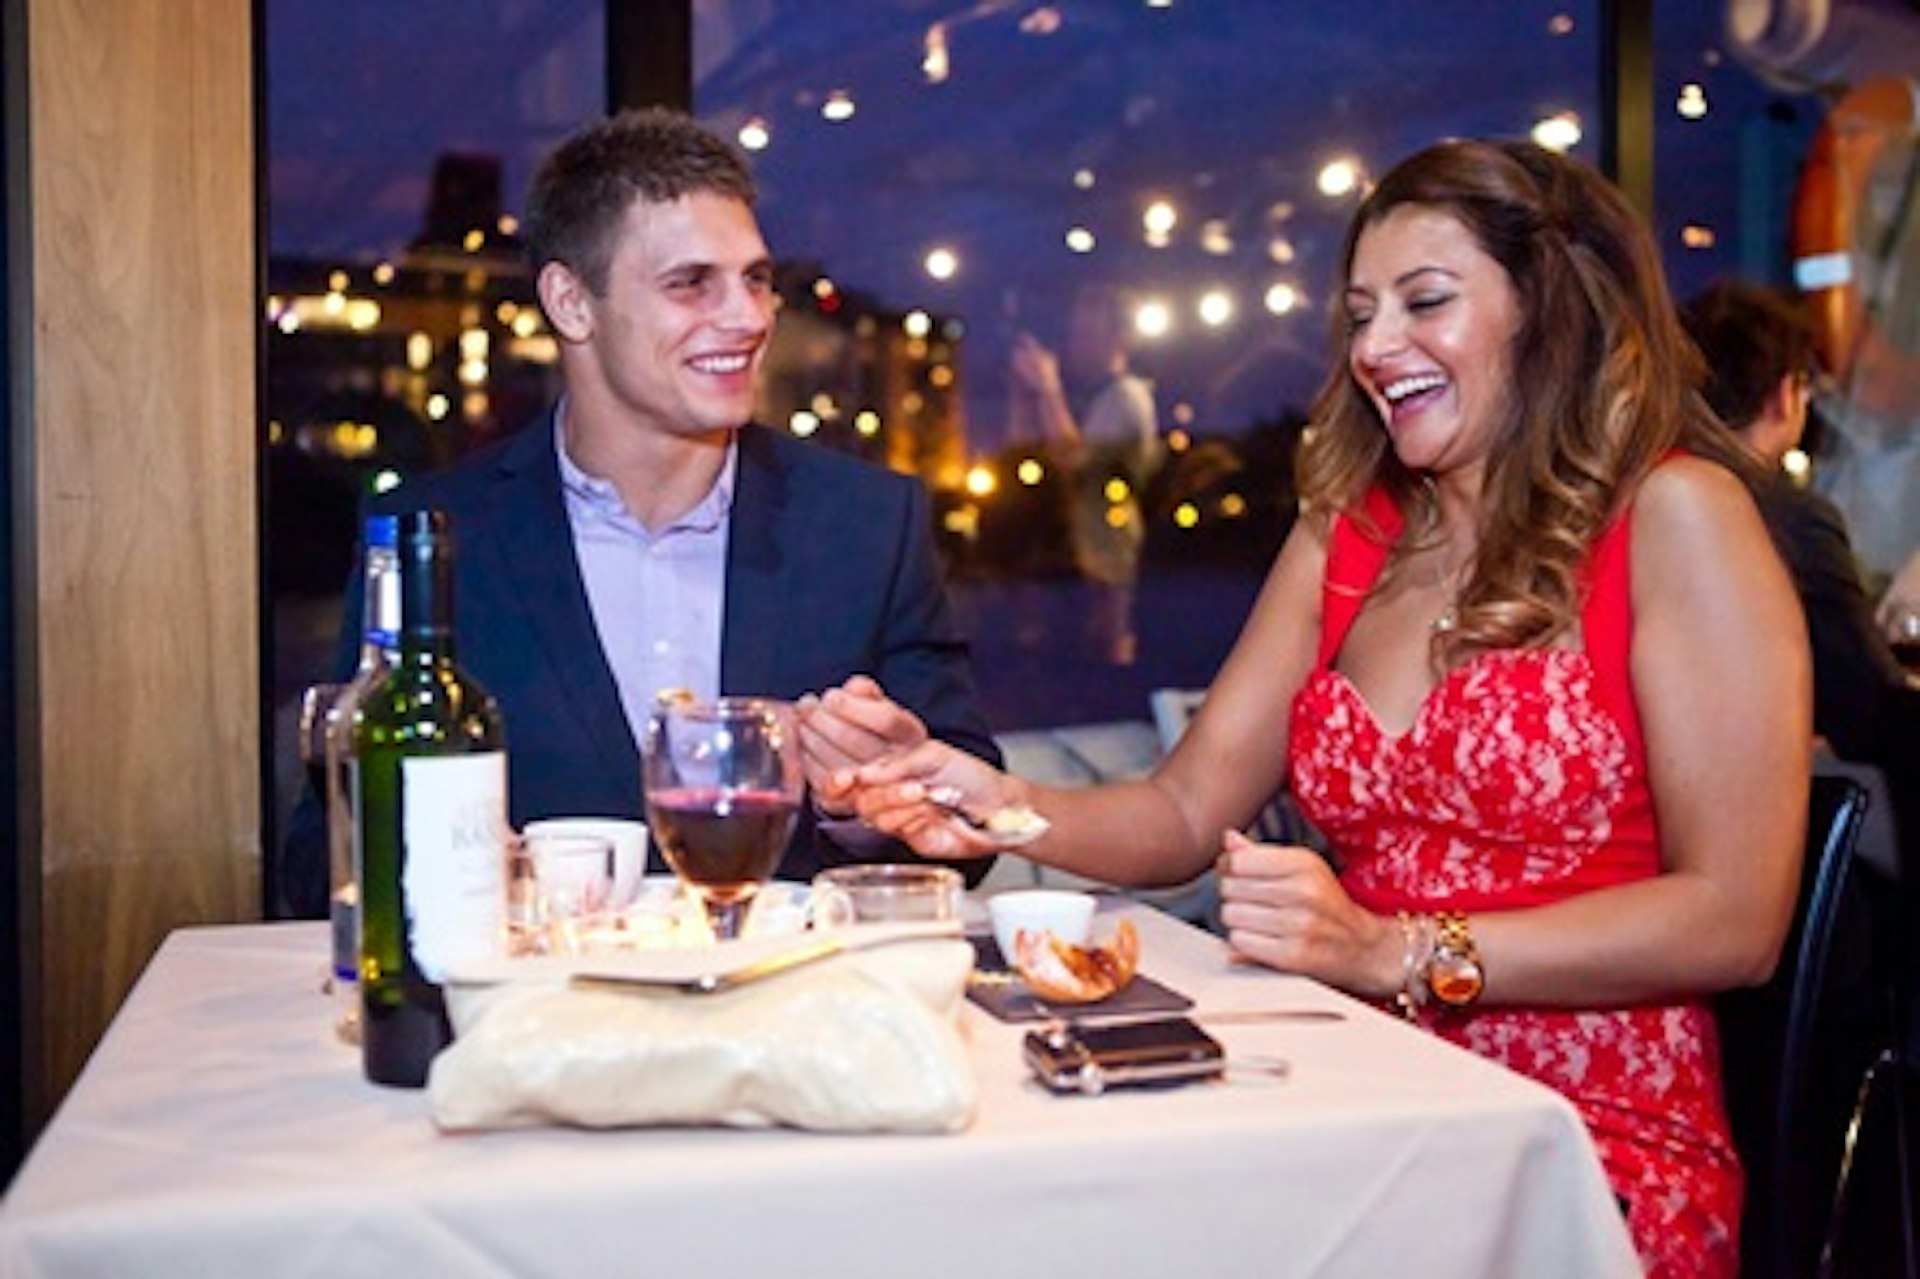 Bateaux London Three Course Thames Dinner Cruise with Wine for Two 2